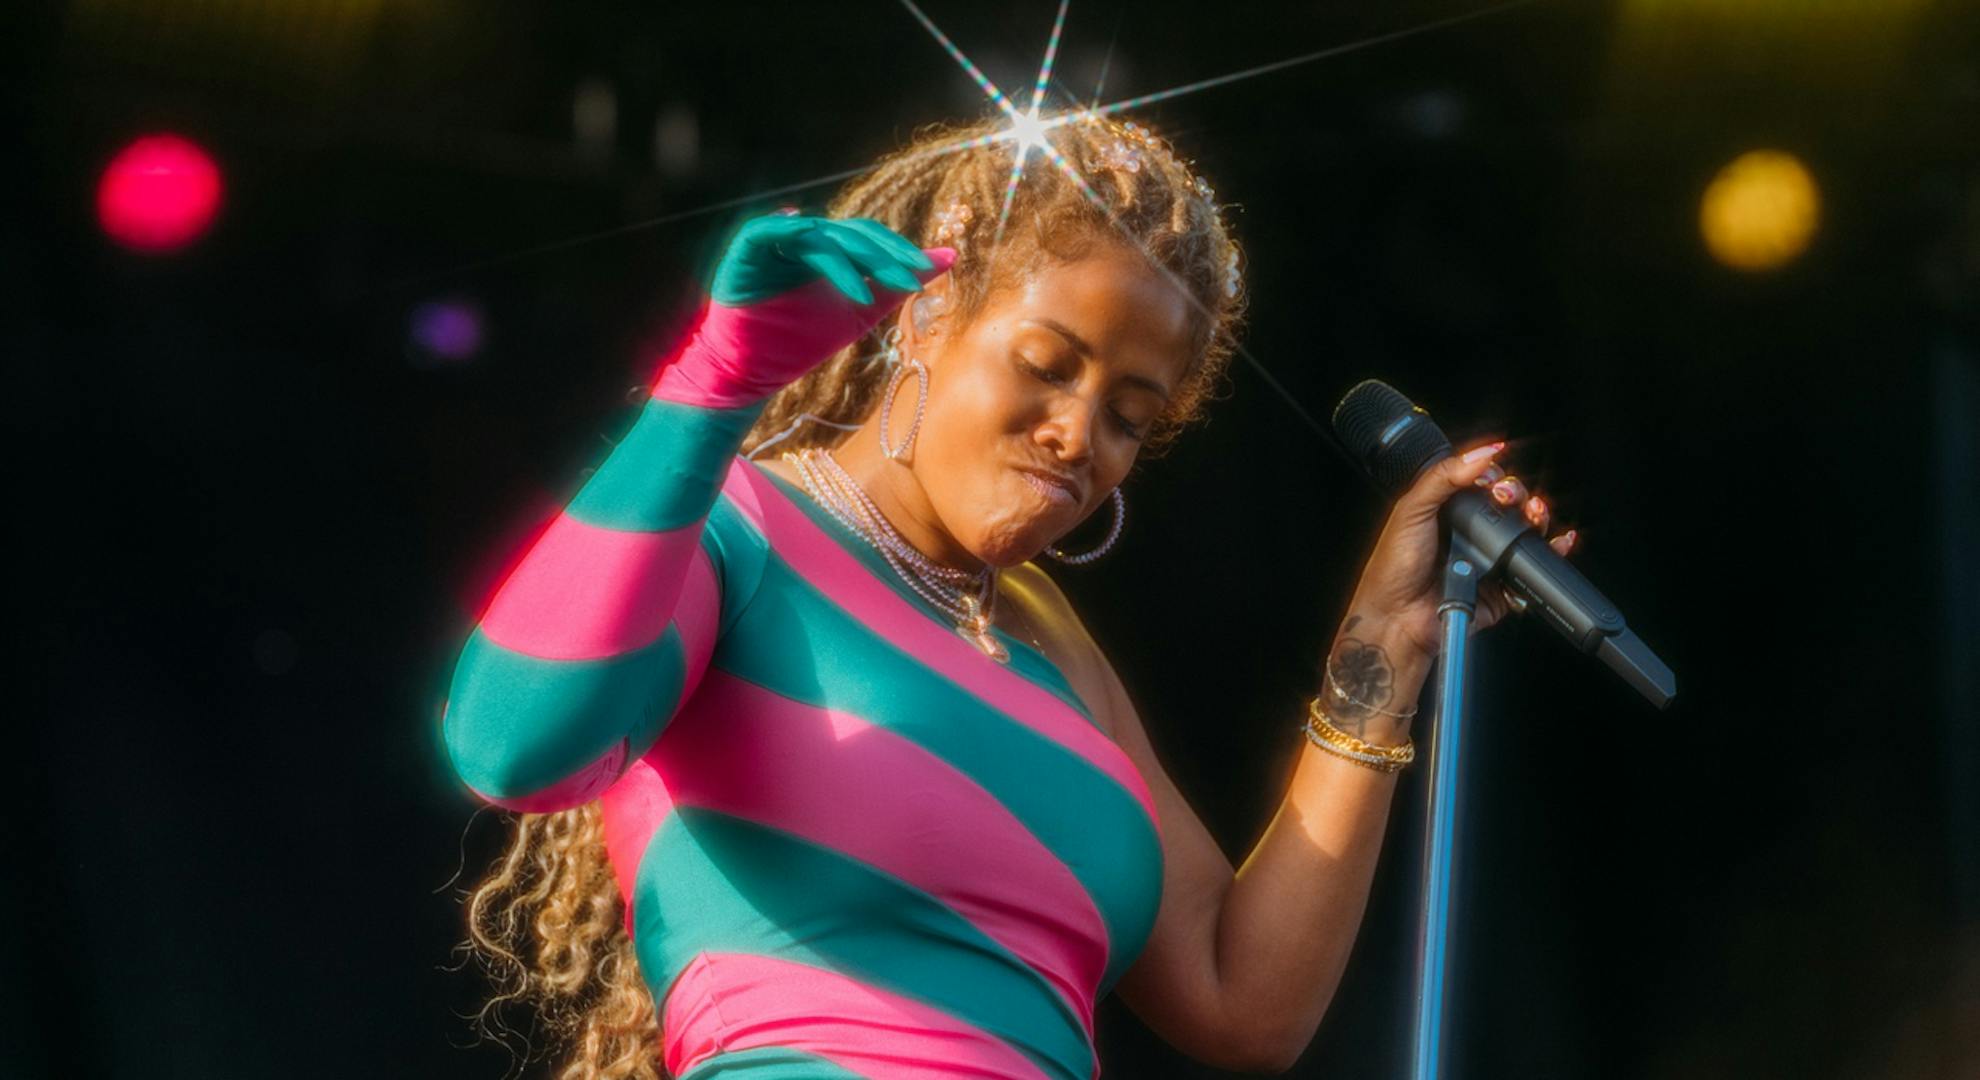 Kelis performs during the 2022 Lovers & Friends music festival at the Las Vegas Festival Grounds on May 15, 2022 in Las Vegas, Nevada.